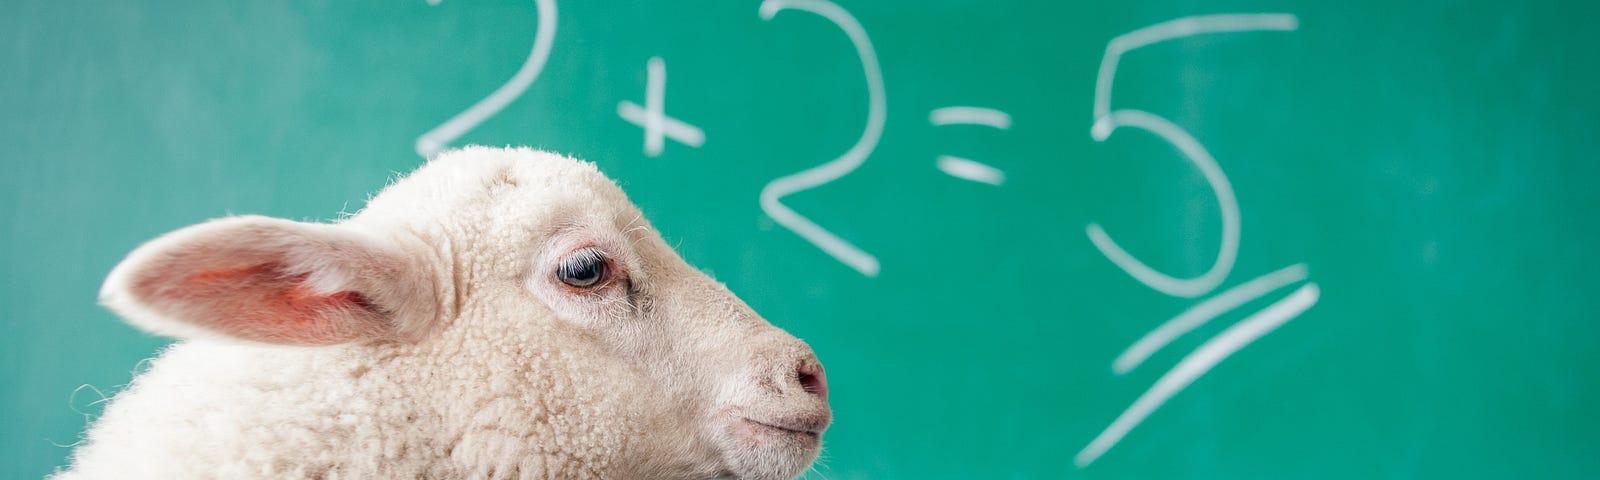 A lamb looking at a chalkboard with the equation 2+2=5 on it